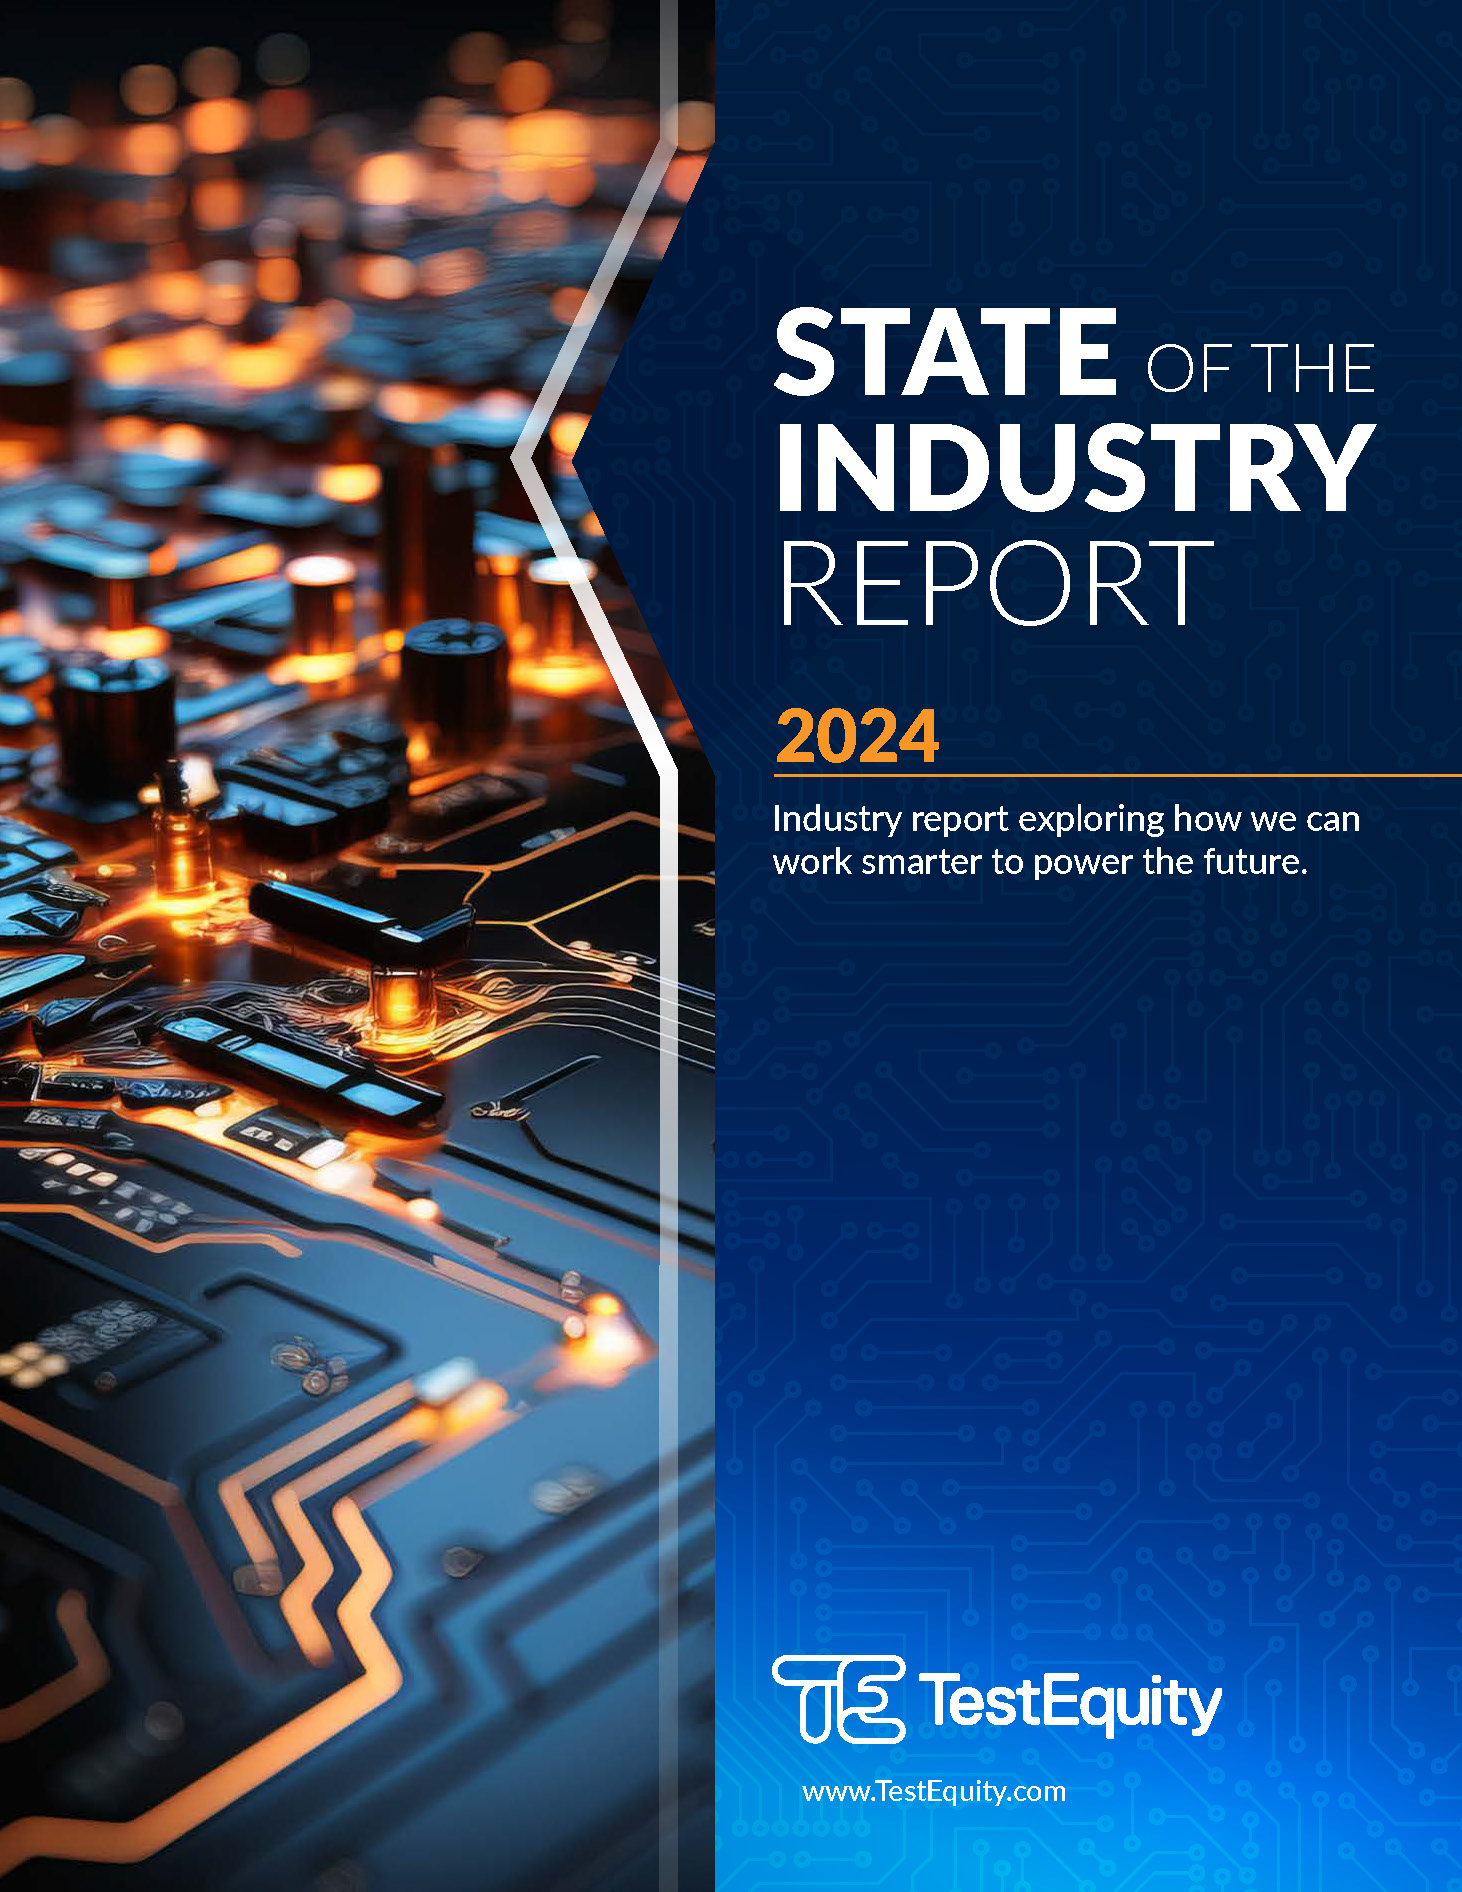 State of the Industry 2023